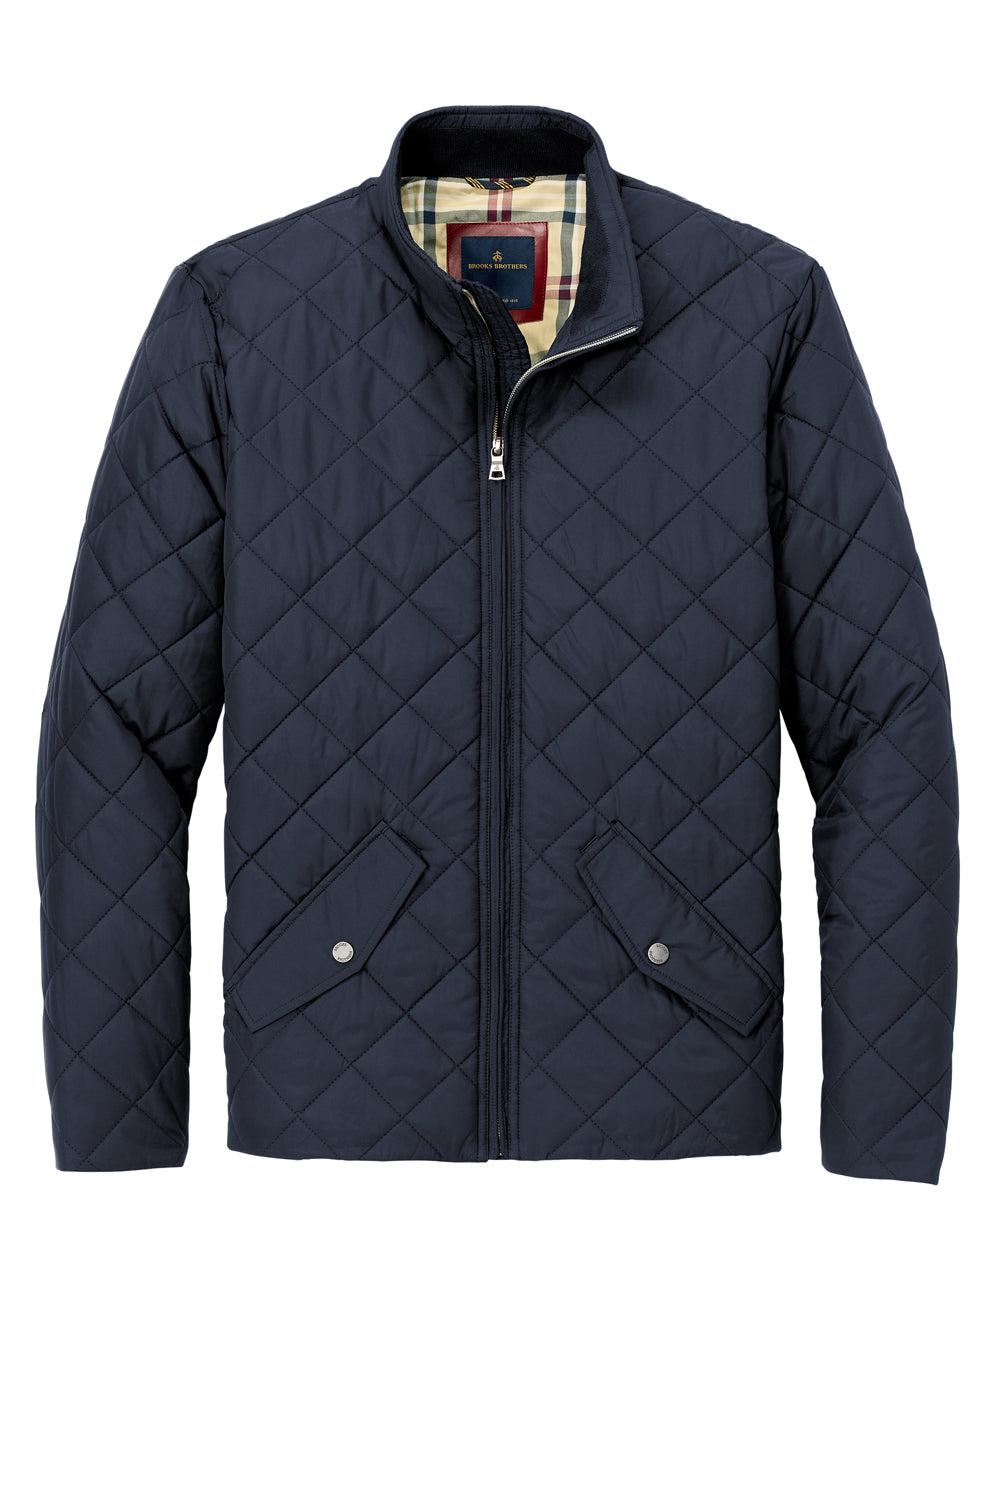 Brooks Brothers Mens Water Resistant Quilted Full Zip Jacket Night Navy Blue Flat Front